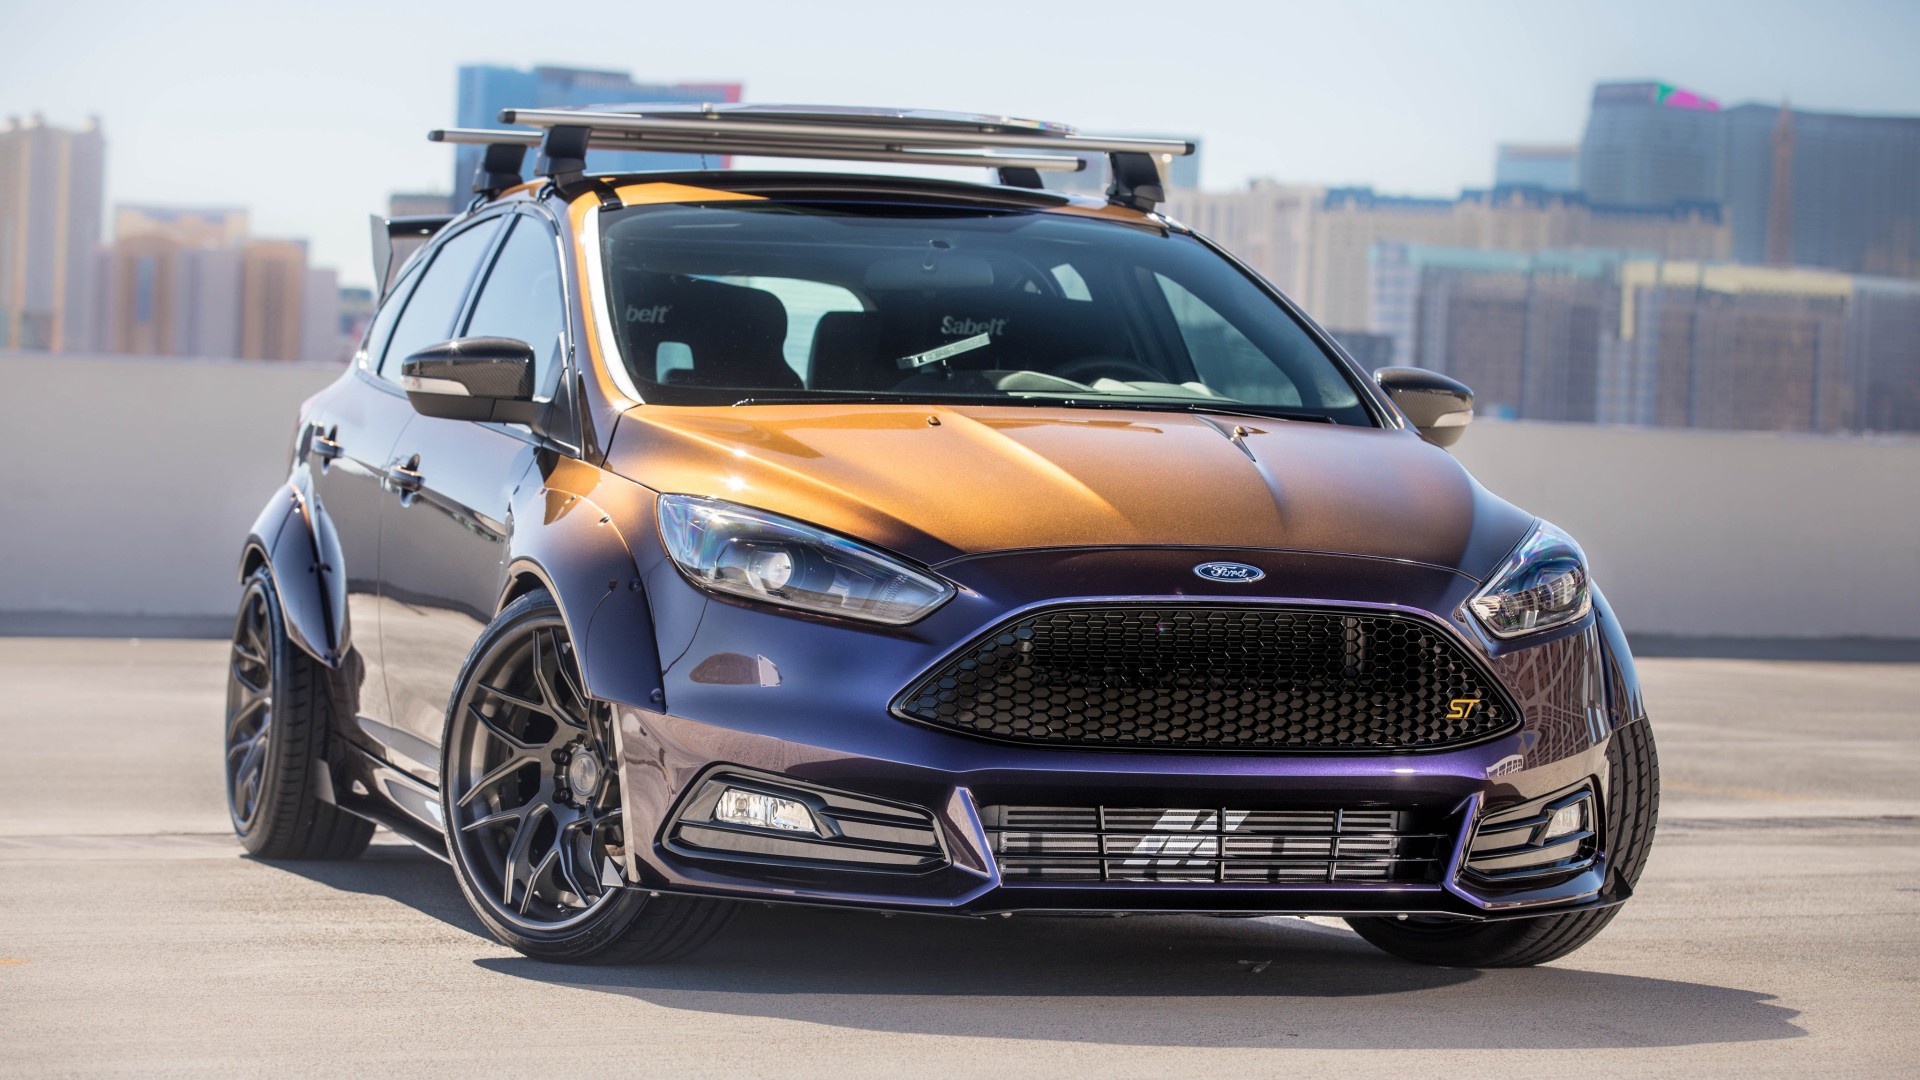 2017 Ford Focus ST by Blood Type Racing 4K Wallpaper | HD ...